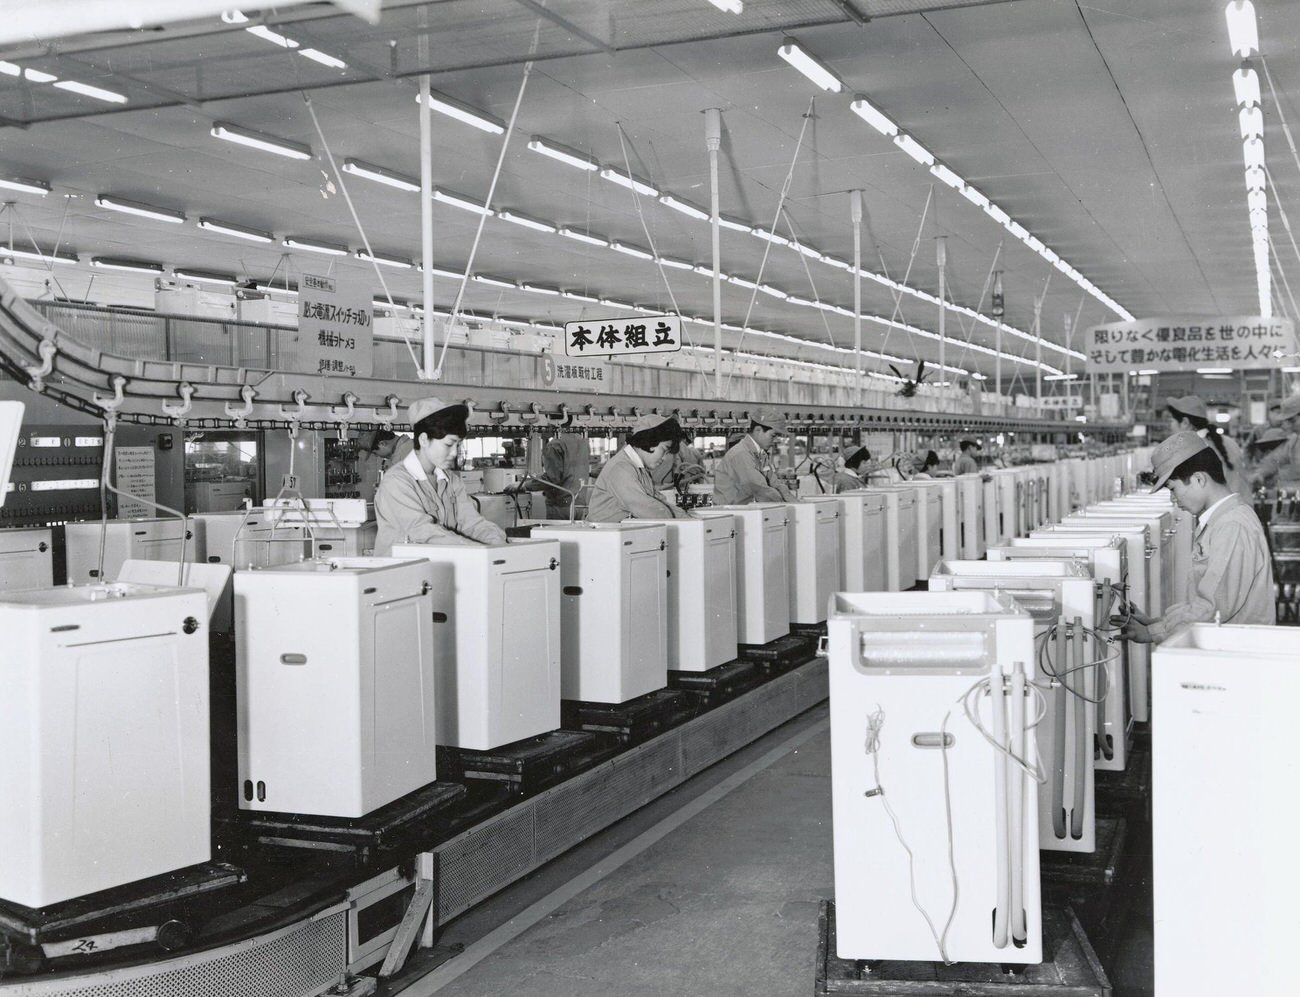 Washing machine assembly lines at Mikuni Plant of Mabsushiba Electric Industrial Co.